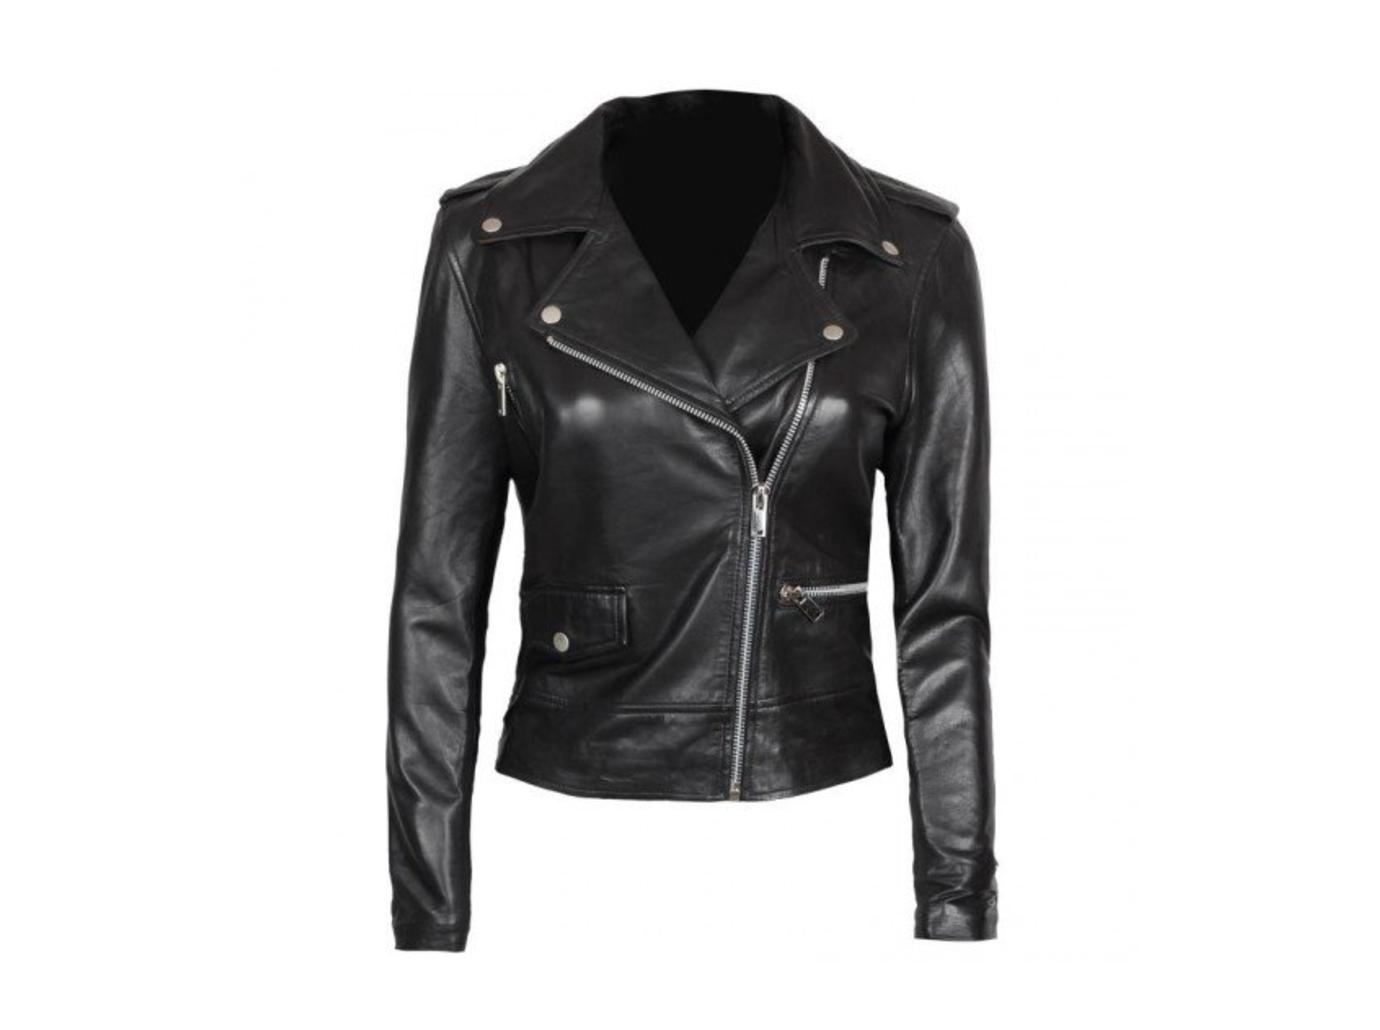 Shop Best-Selling, Trend-Forward Leather Jackets By Angel Jackets